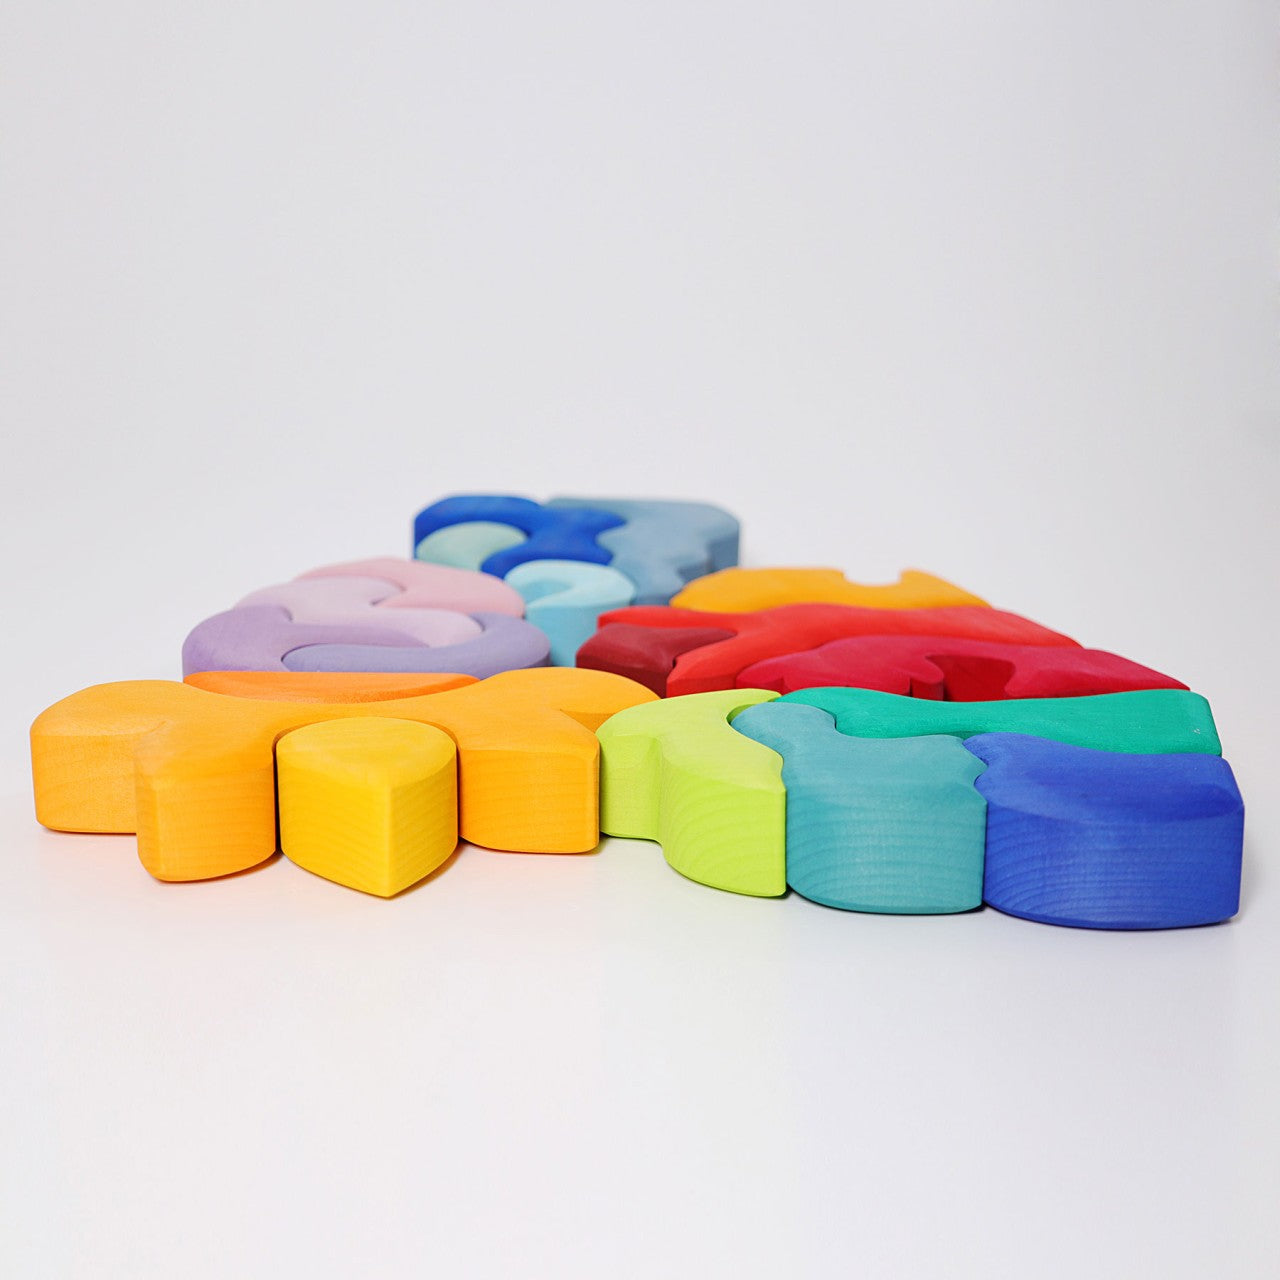 Casa Sole | 4 Pieces | Wooden Toys for Kids | Open-Ended Play